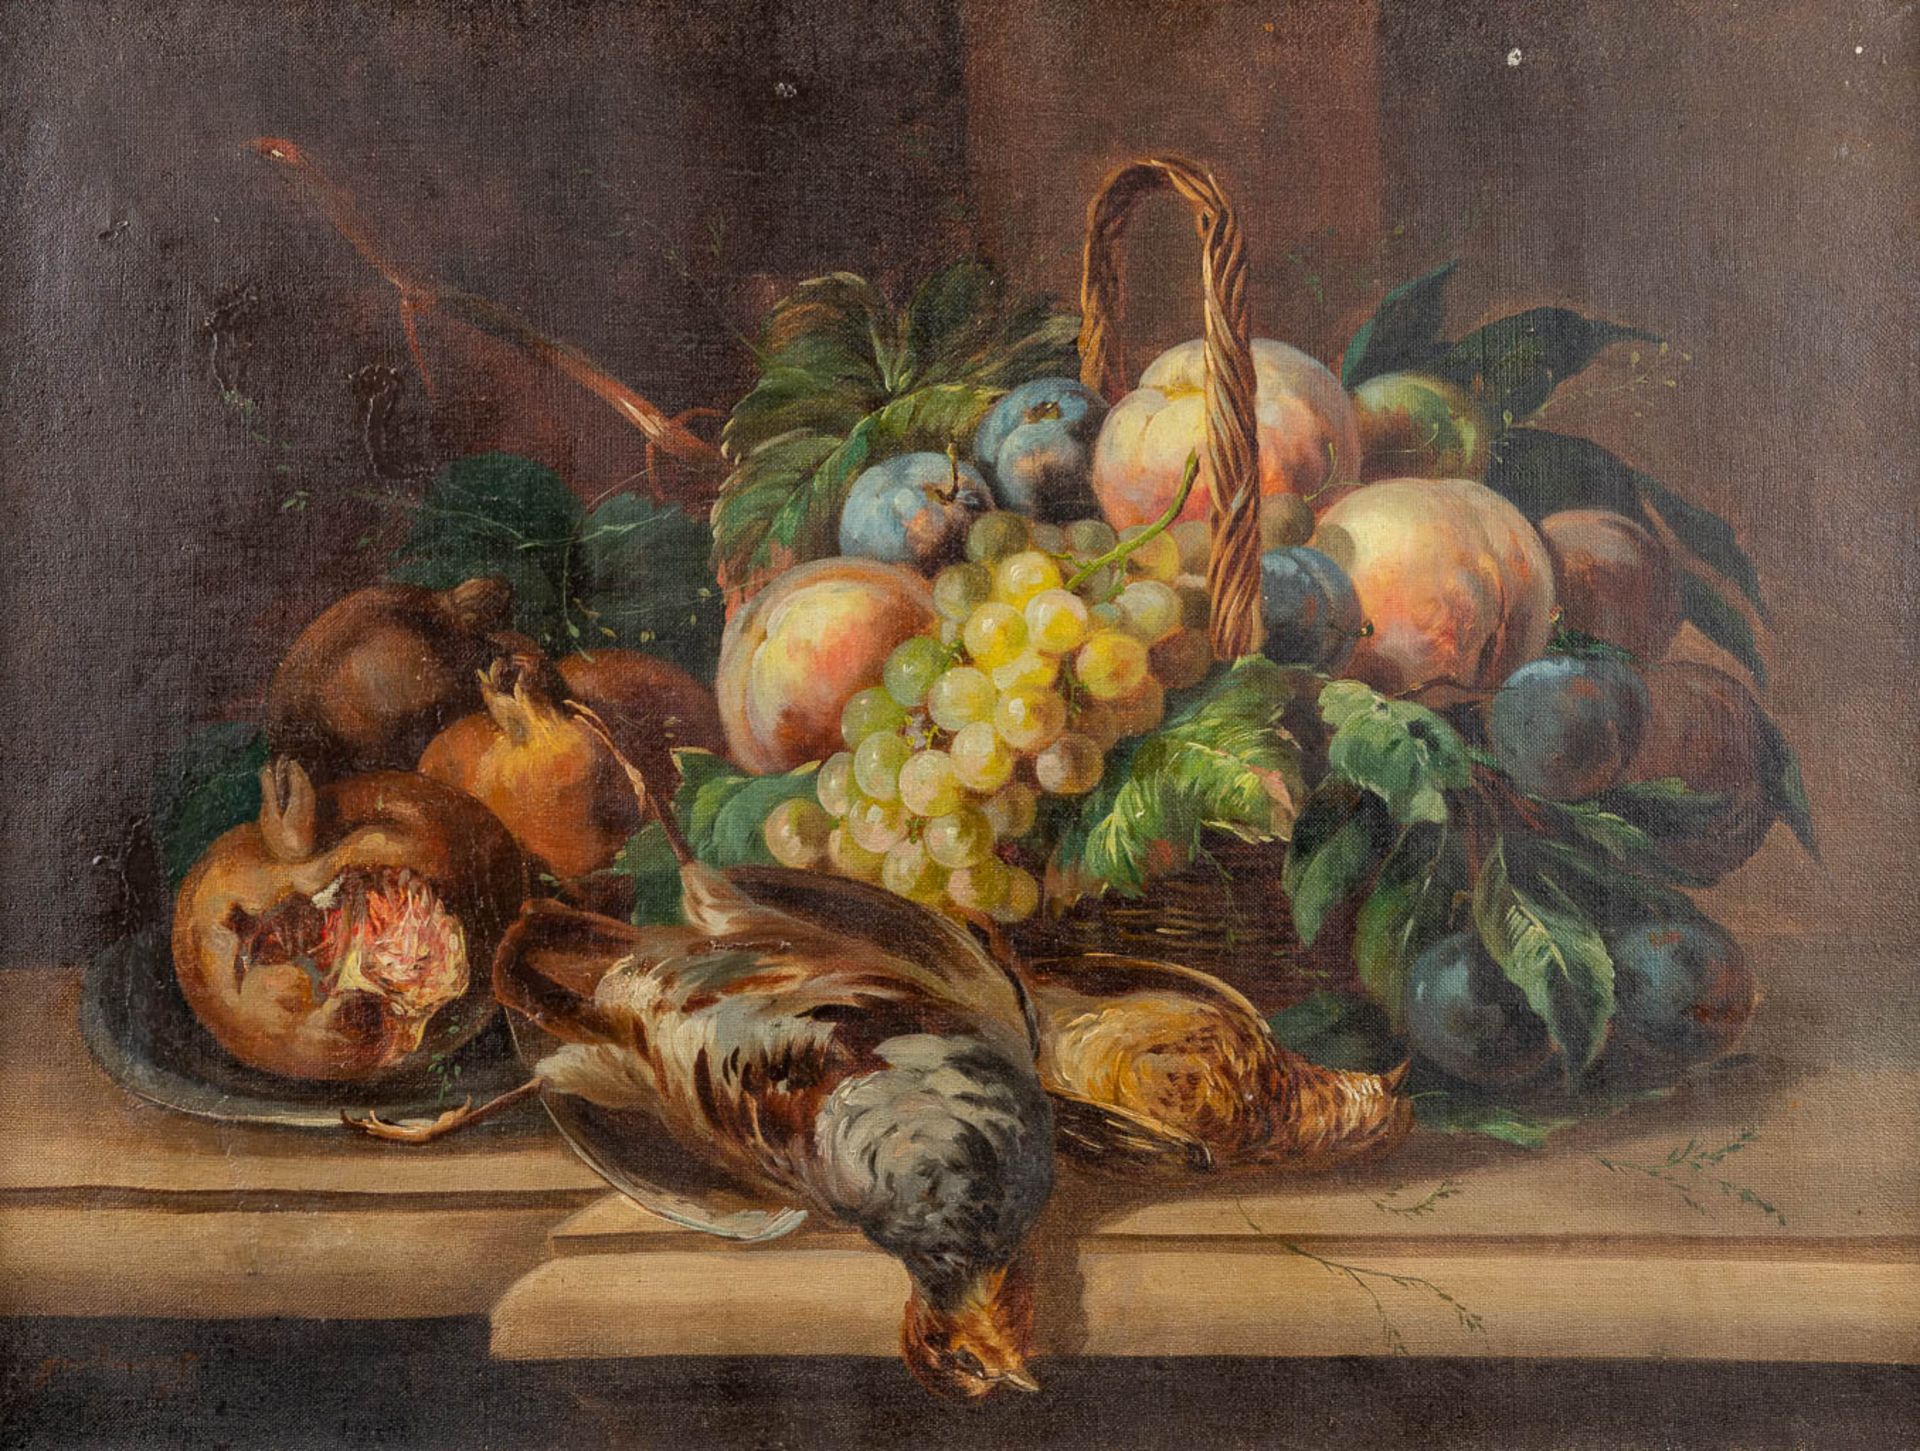 A 'Nature Morte' painting, oil on canvas. Signed 'Guillaume'. 19th C. (W:65 x H:49,5 cm)